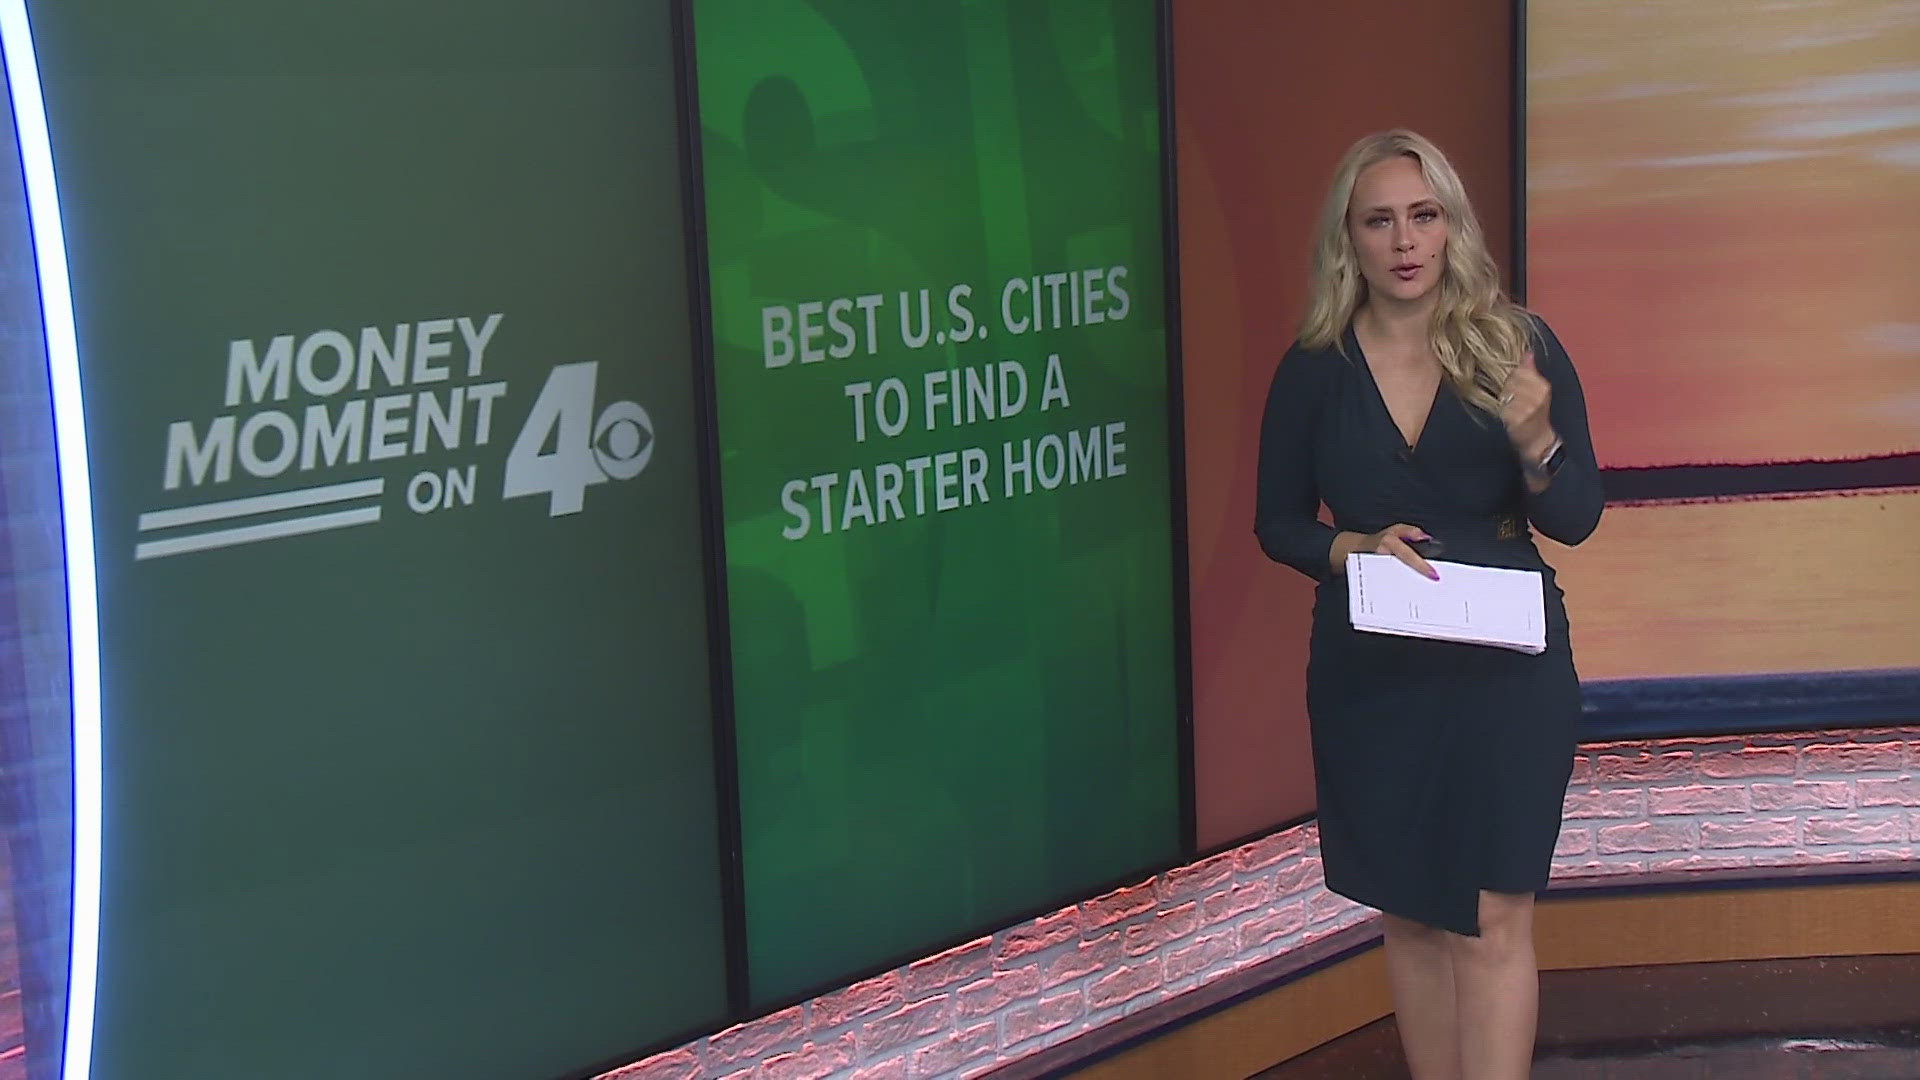 In today's Money Moment on 4 we looking to the list of best cities to buy a starter home, and some ideas for side hustling a second income.